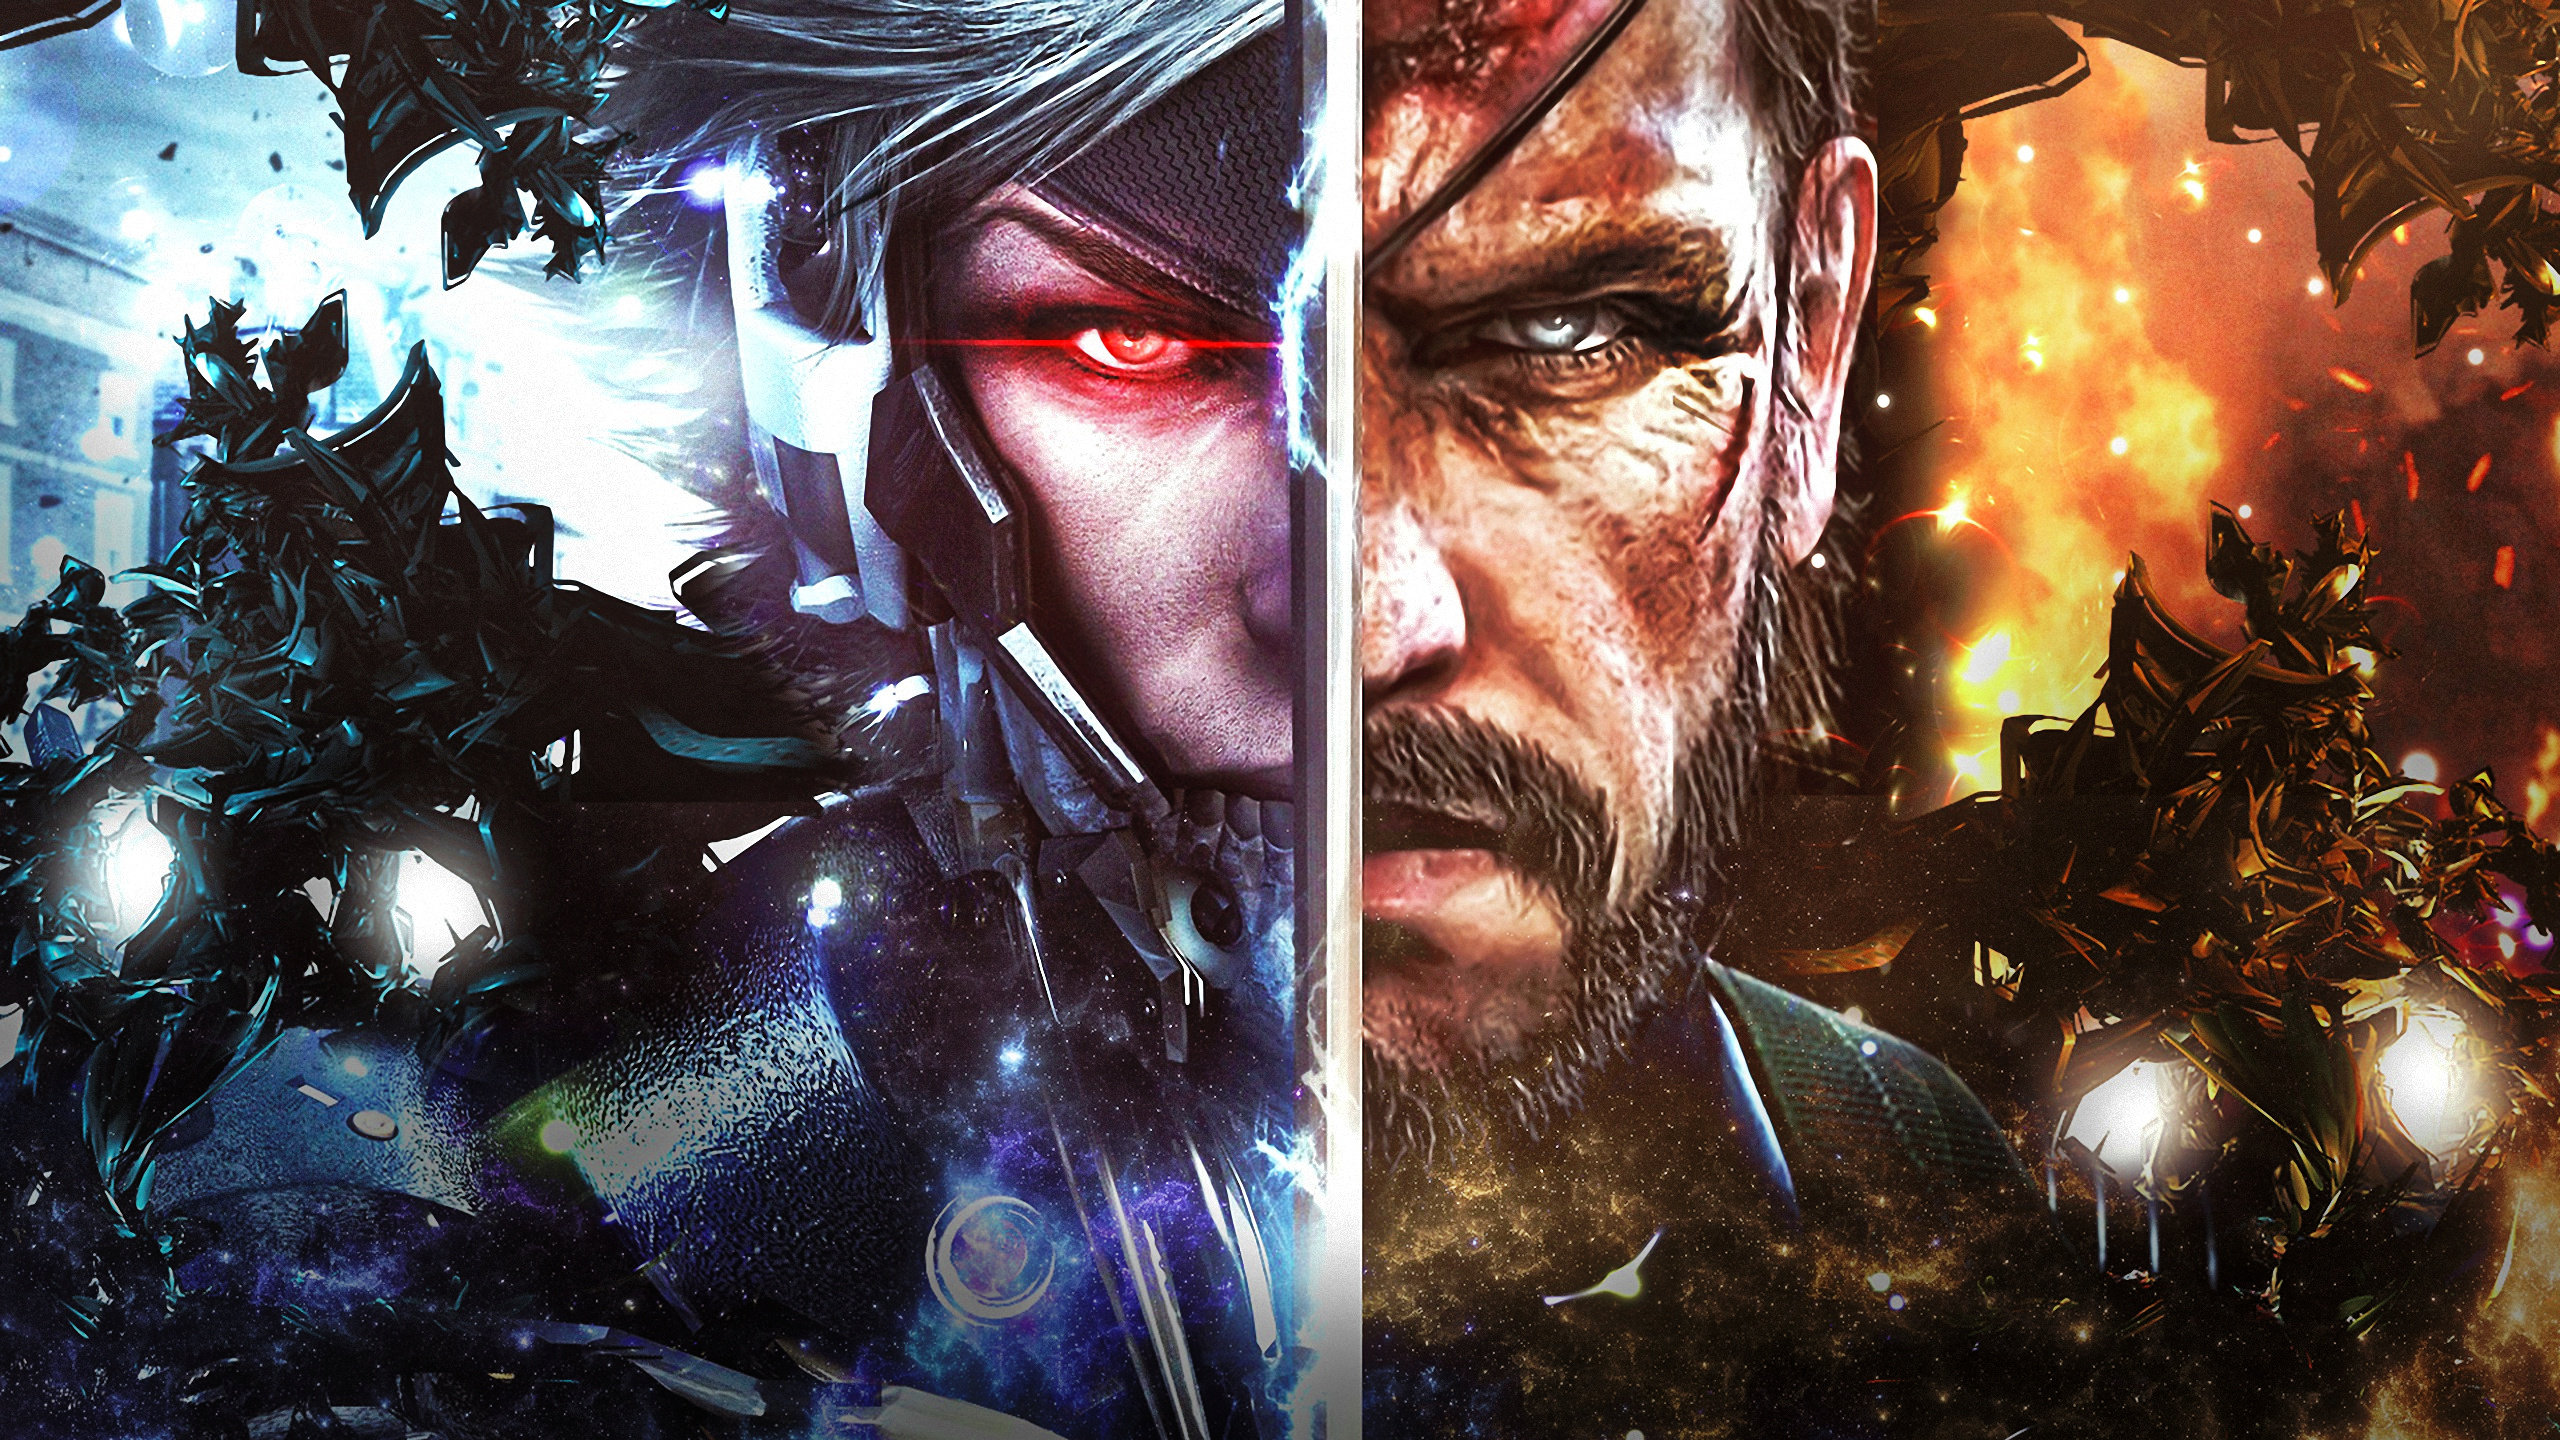 Awesome Metal Gear Rising: Revengeance (MGR) free background ID:130588 for hd 2560x1440 desktop